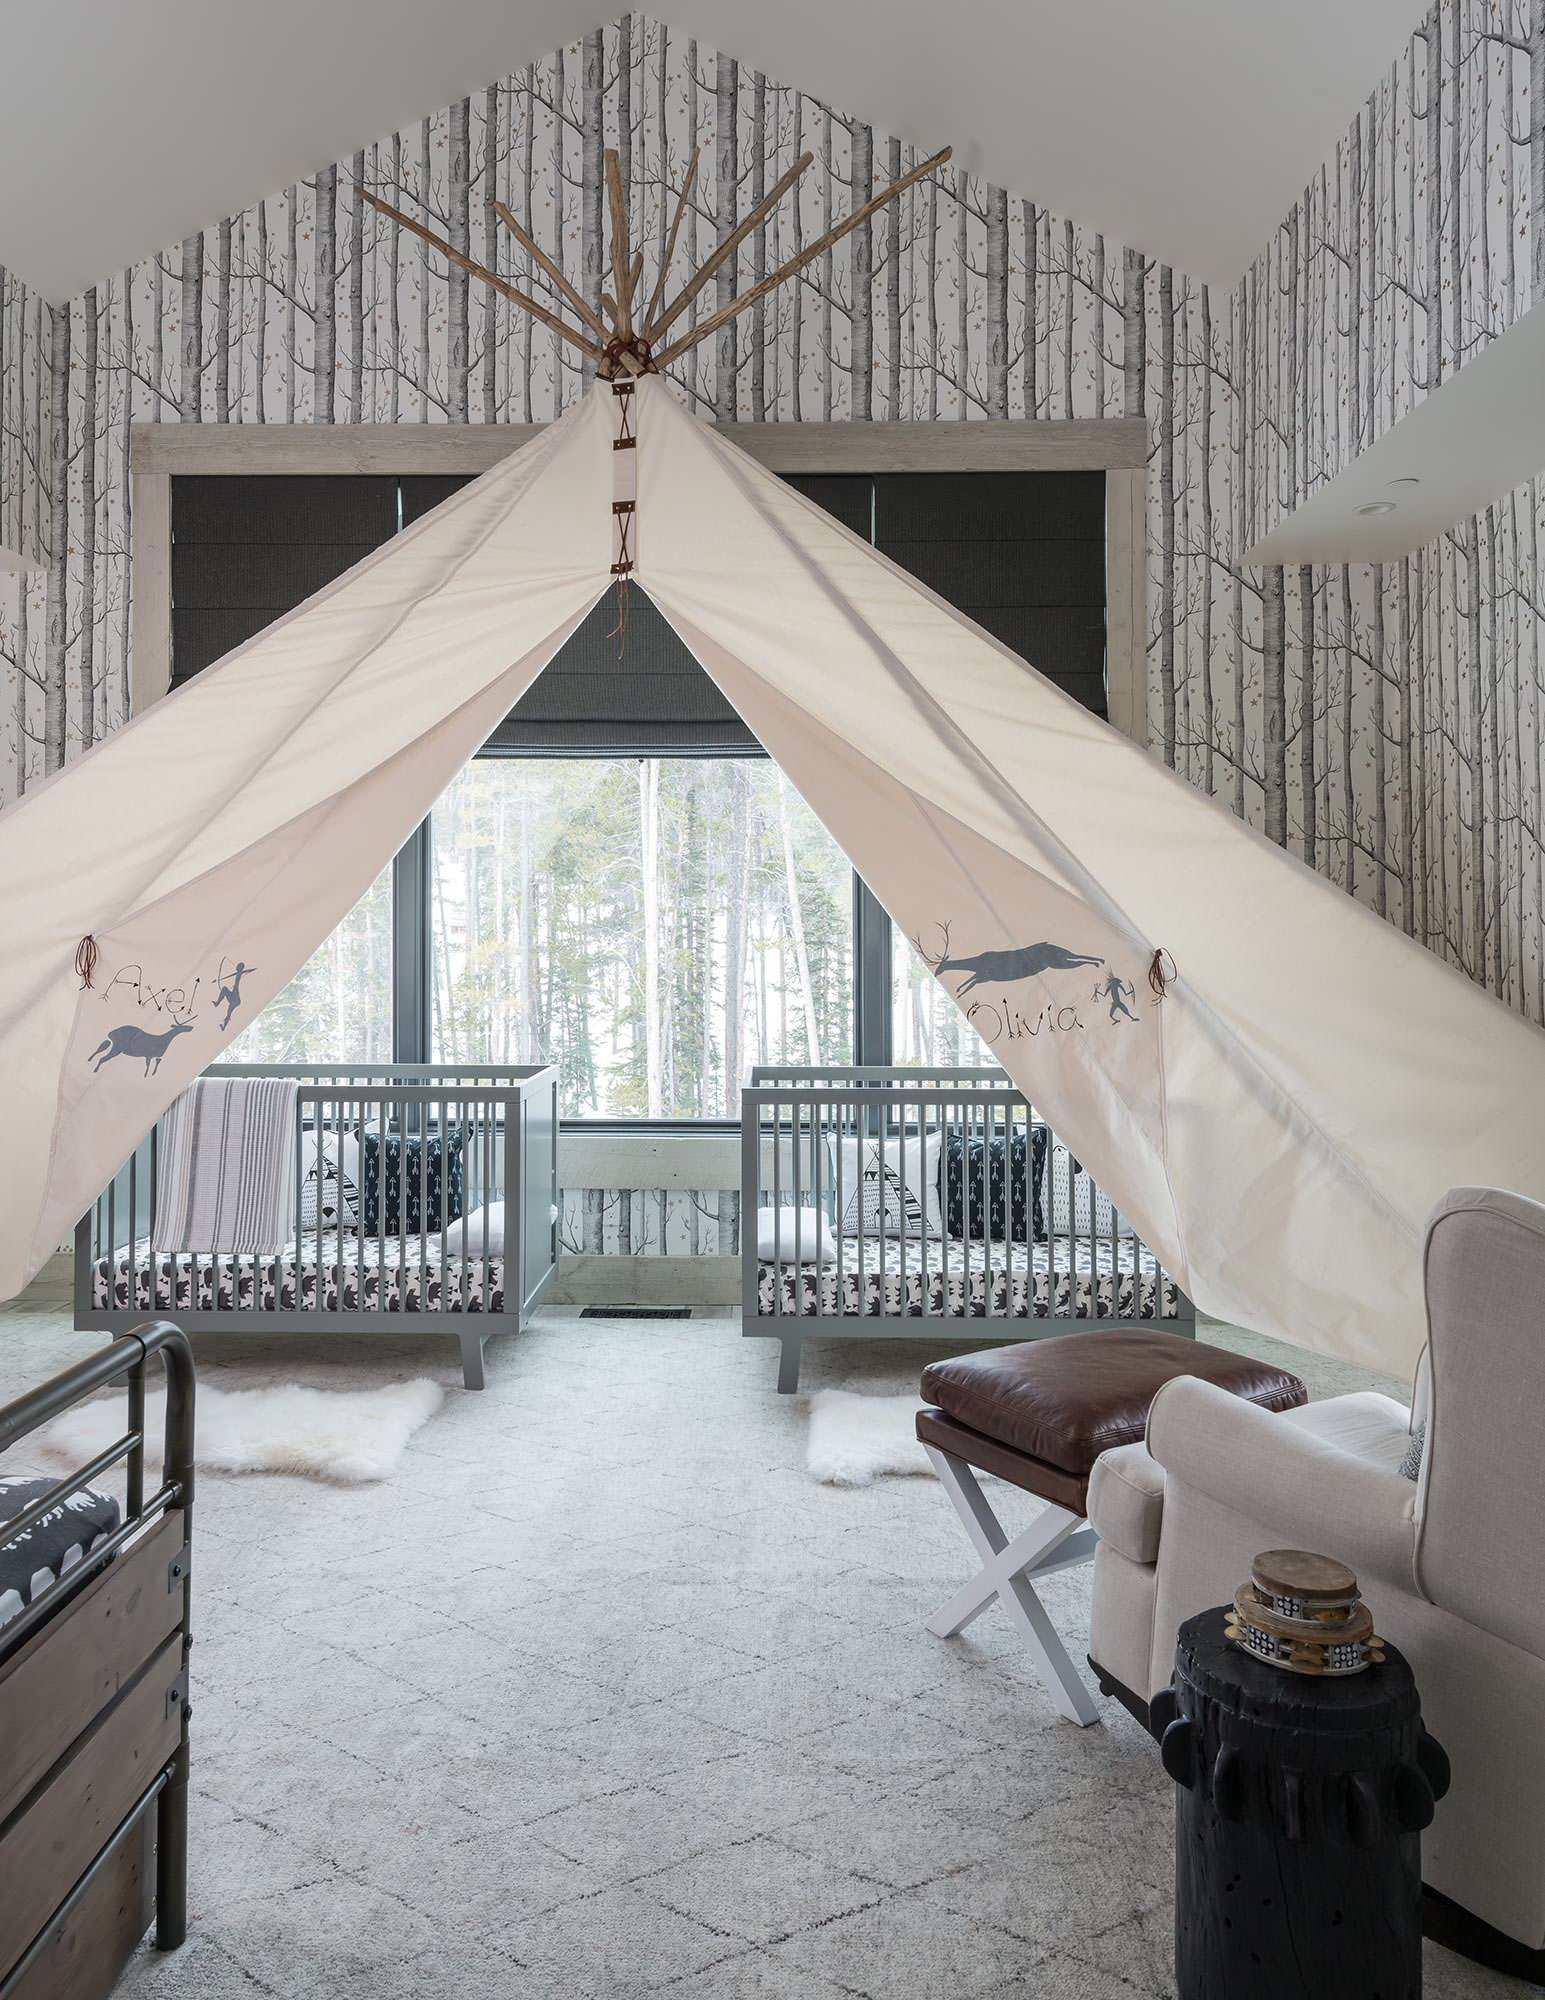 39 Top Images Rustic Baby Room Decor / 75 Beautiful Rustic Nursery Pictures Ideas December 2020 Houzz